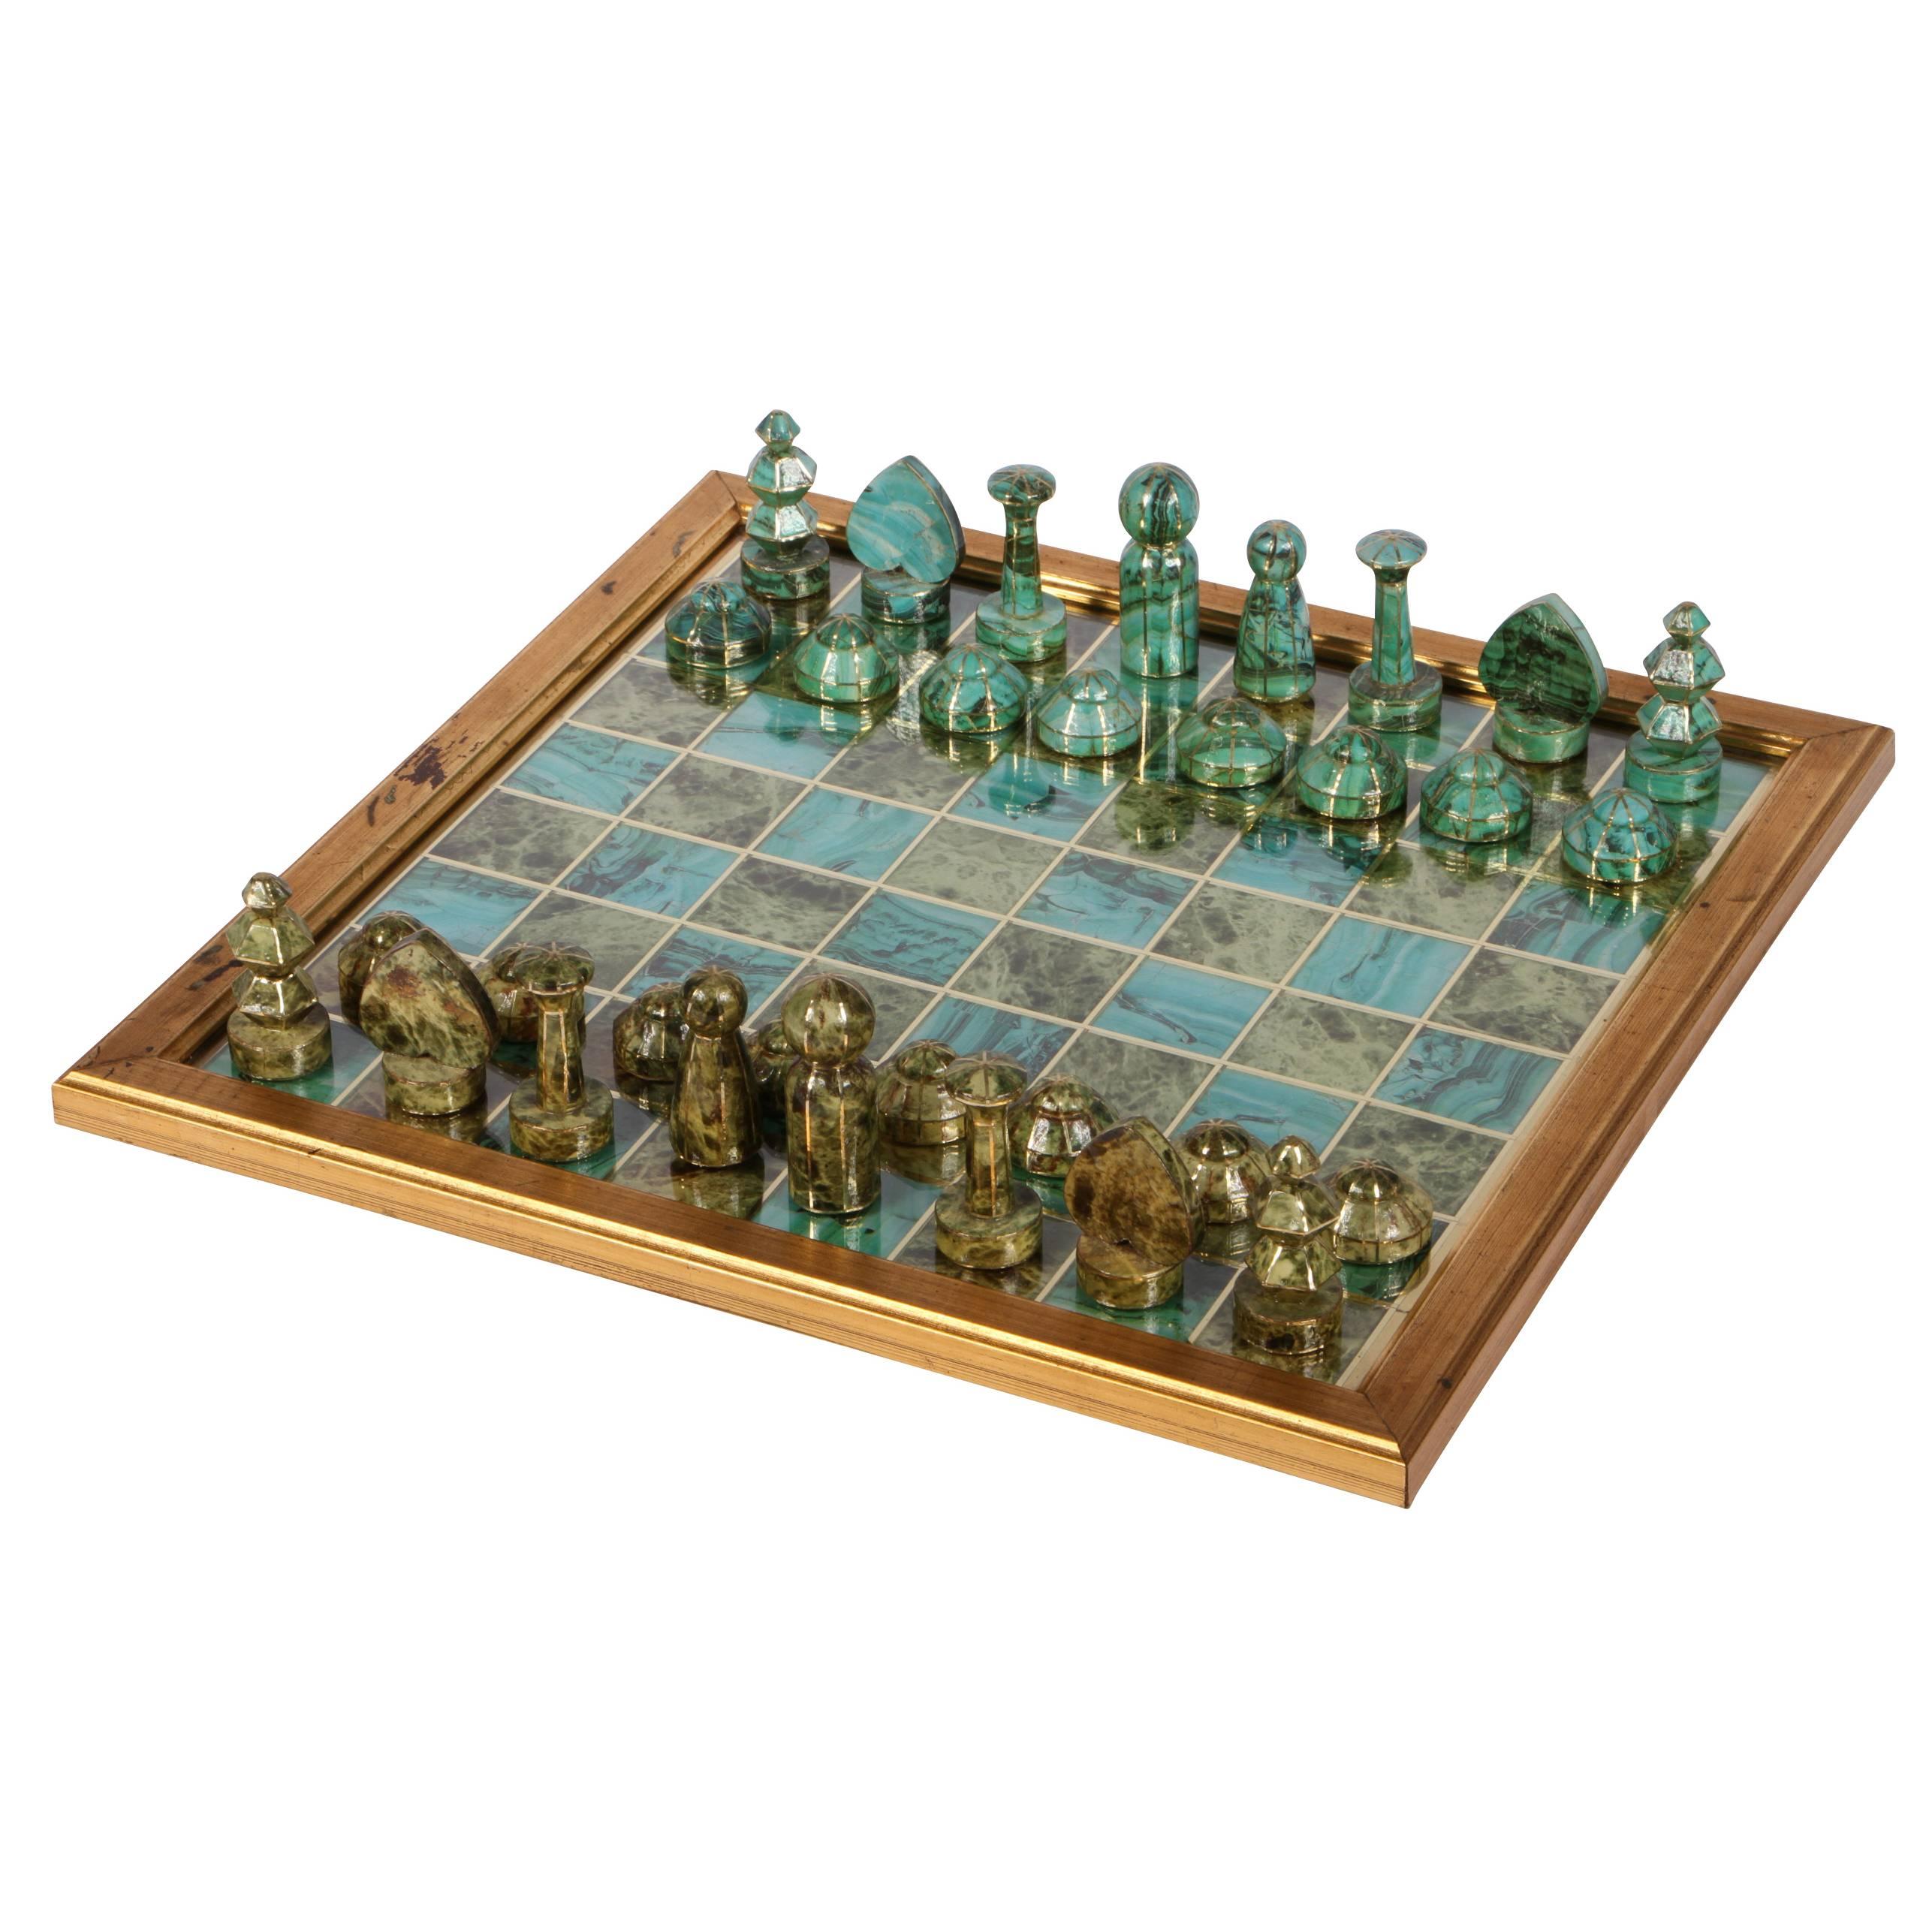 Decoupage Chess Board with Gaming Pieces